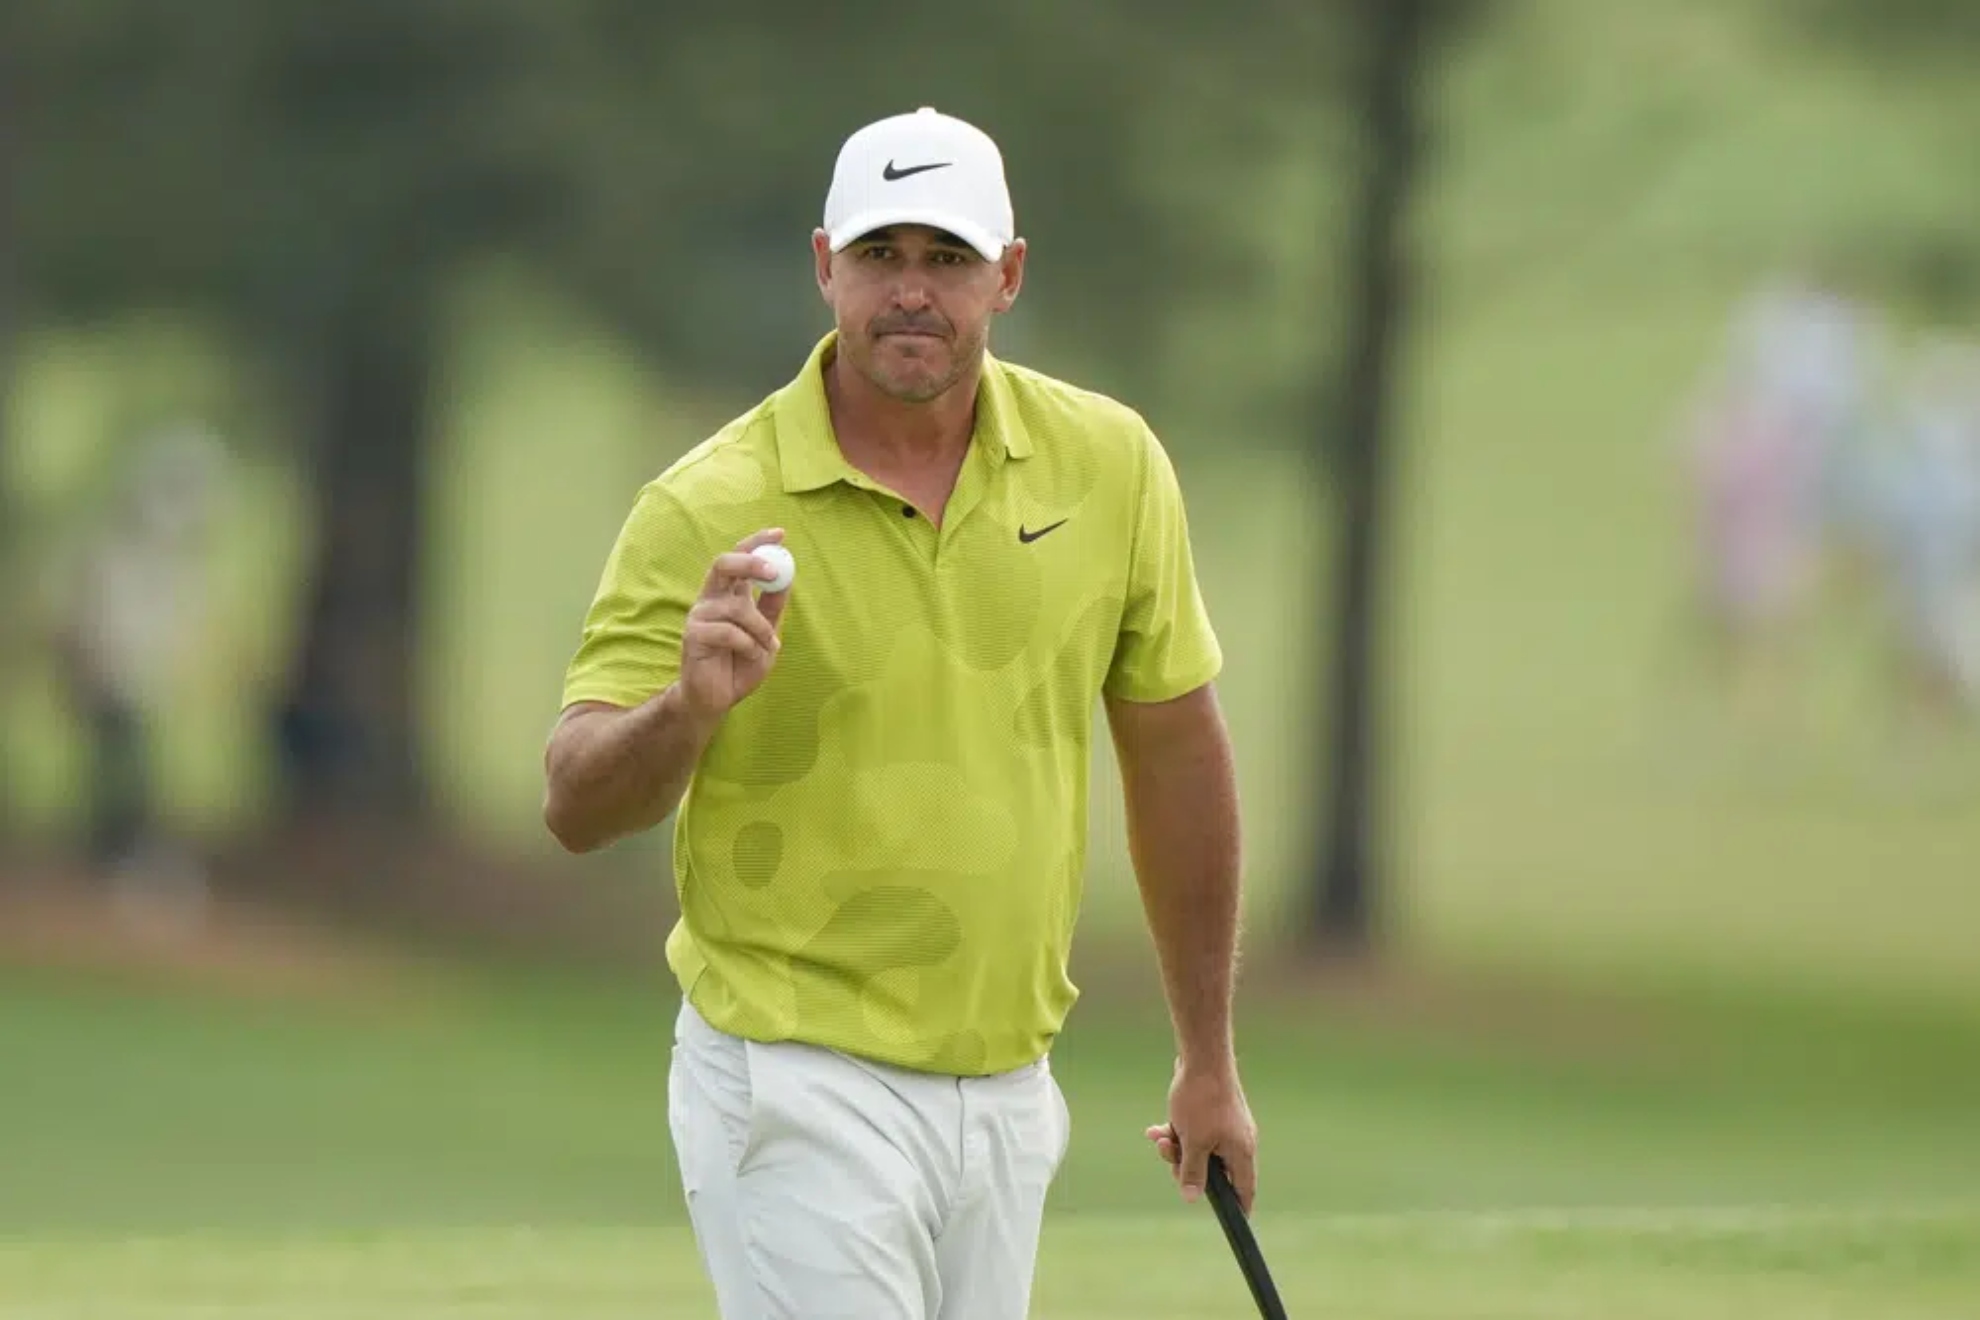 Brooks Koepka wearing green shirt and white cap while holding a golf ball